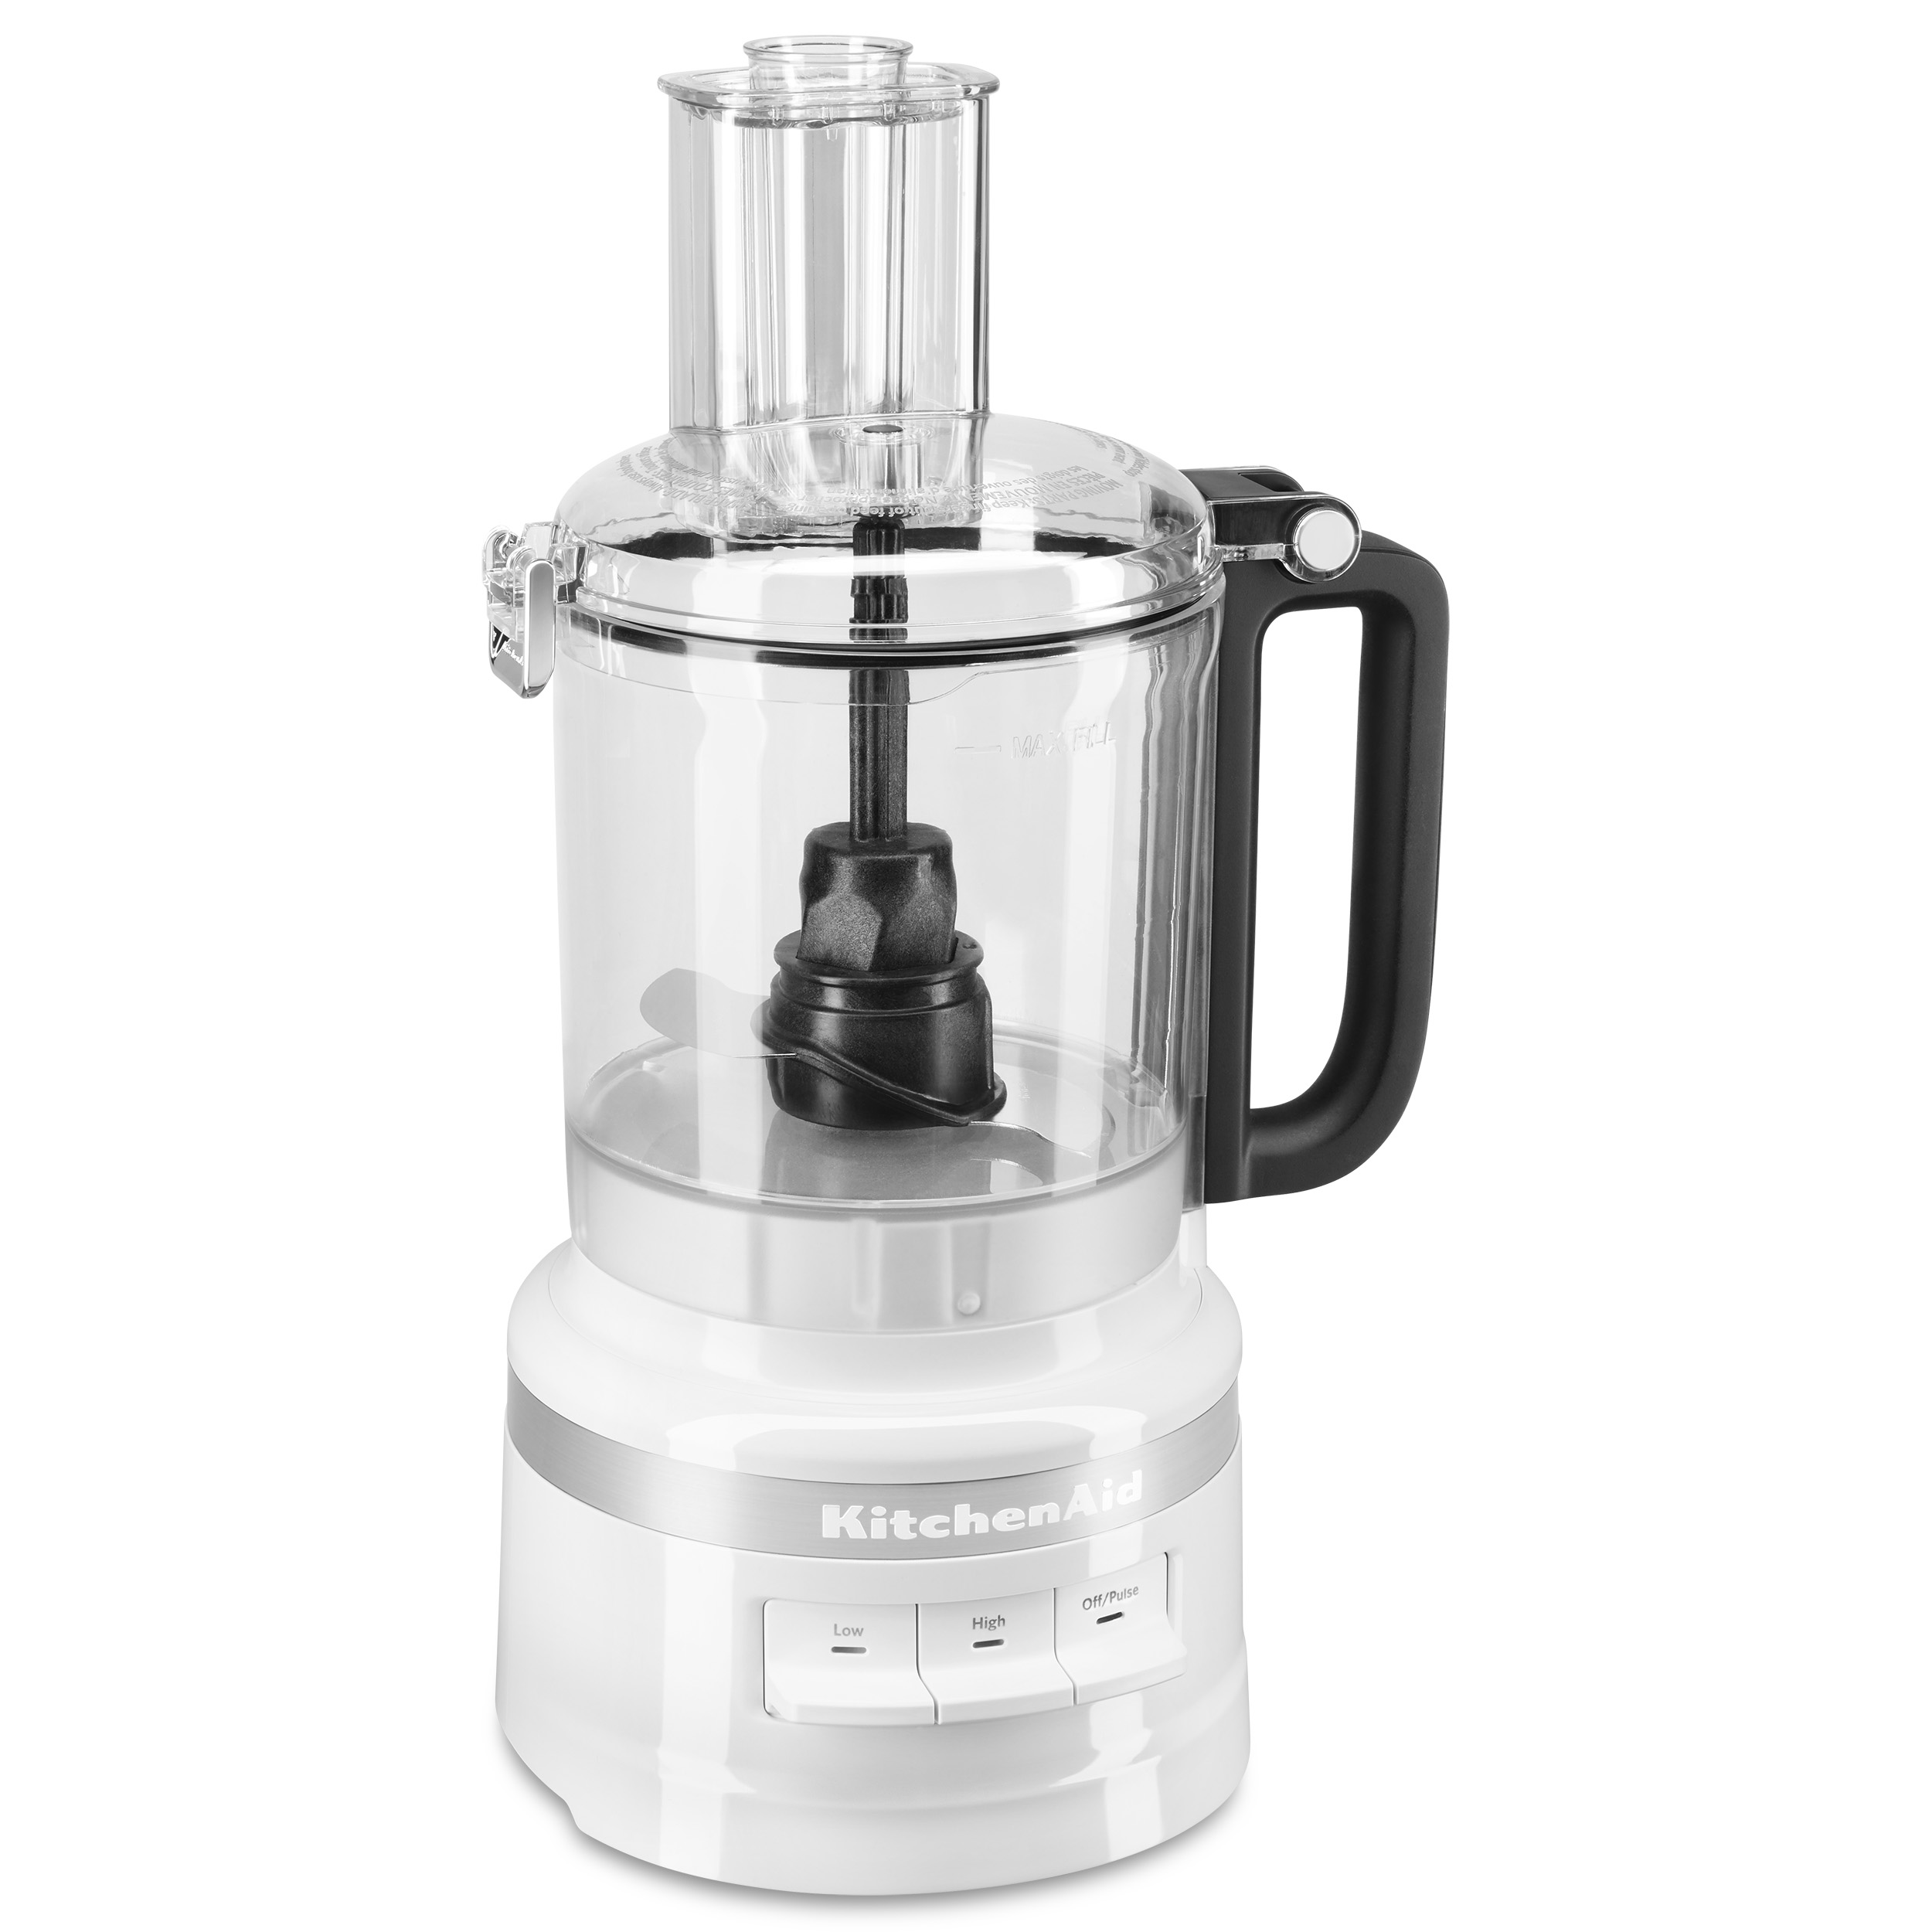 KitchenAid KFP0918WH 9 Cup Food Processor, White - image 3 of 7